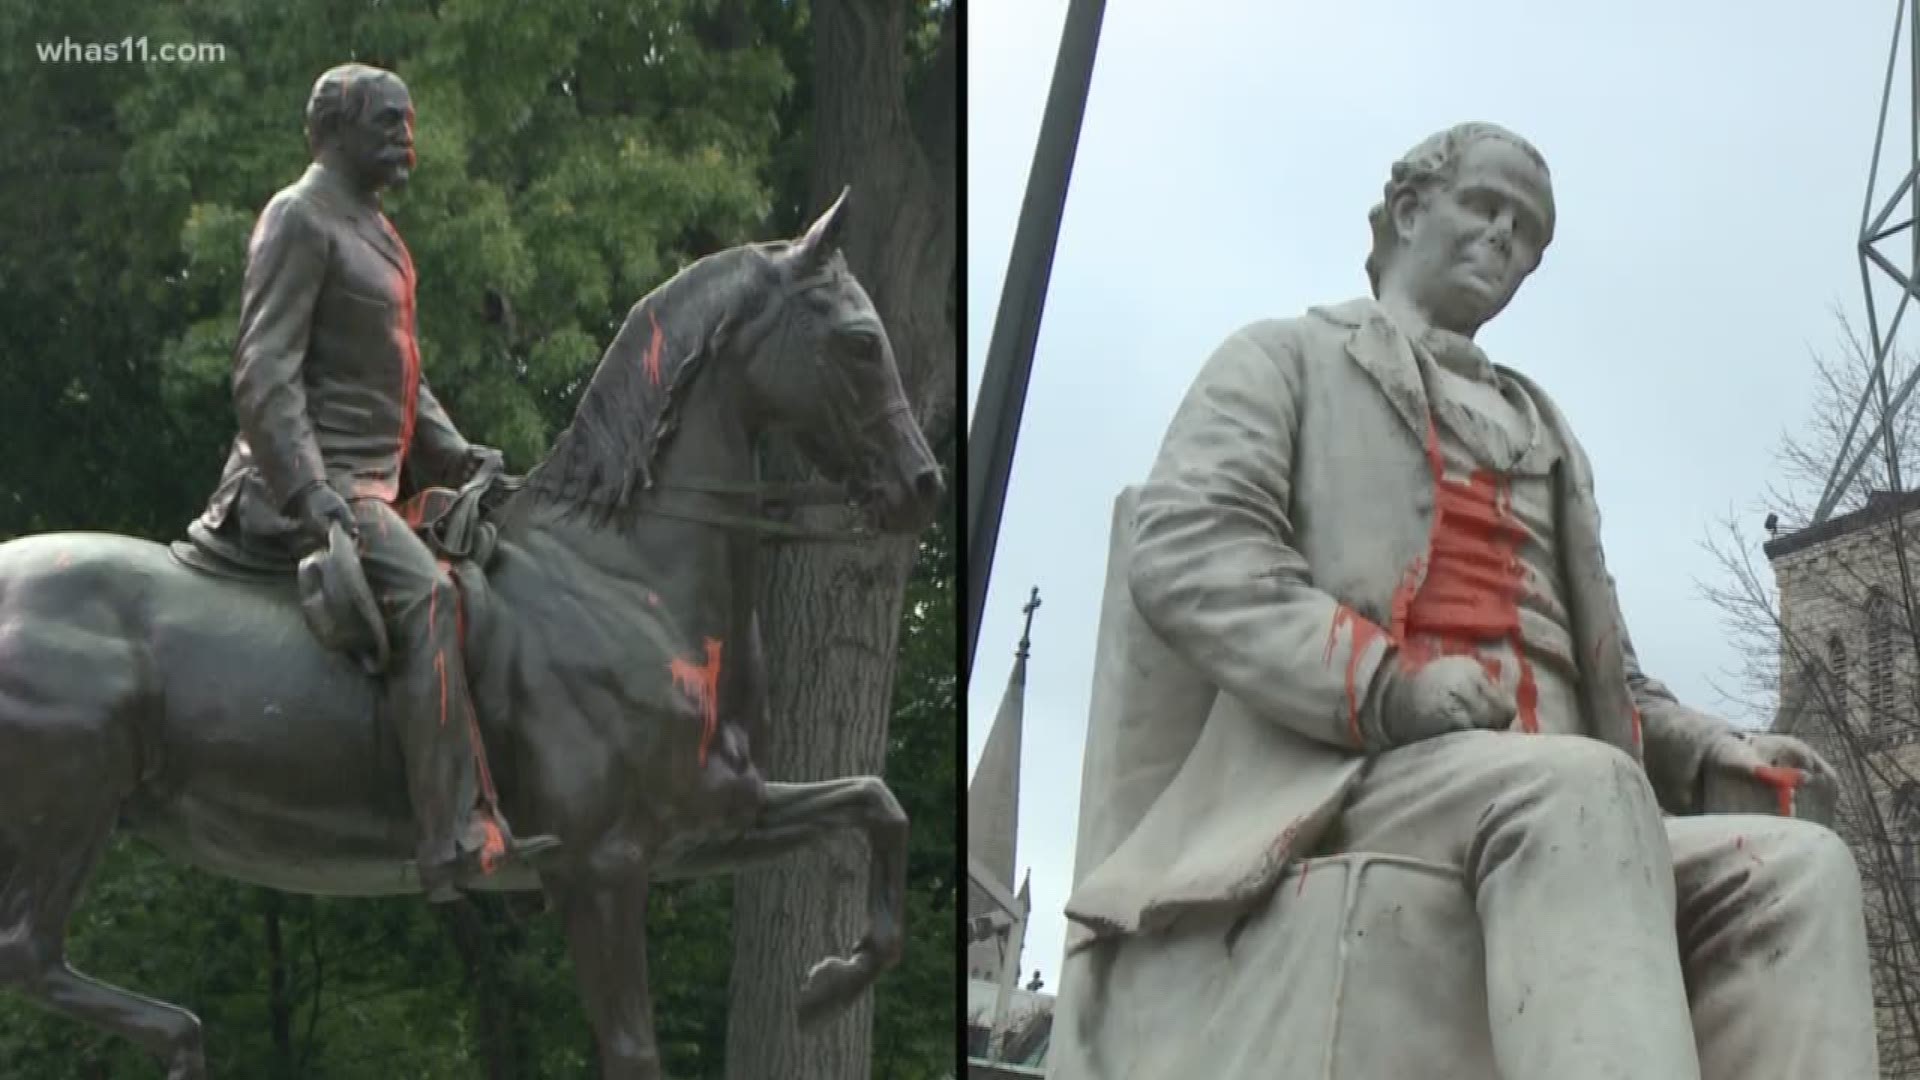 Louisville's mayor has decided to move the Castleman and Prentice statues from public spaces.